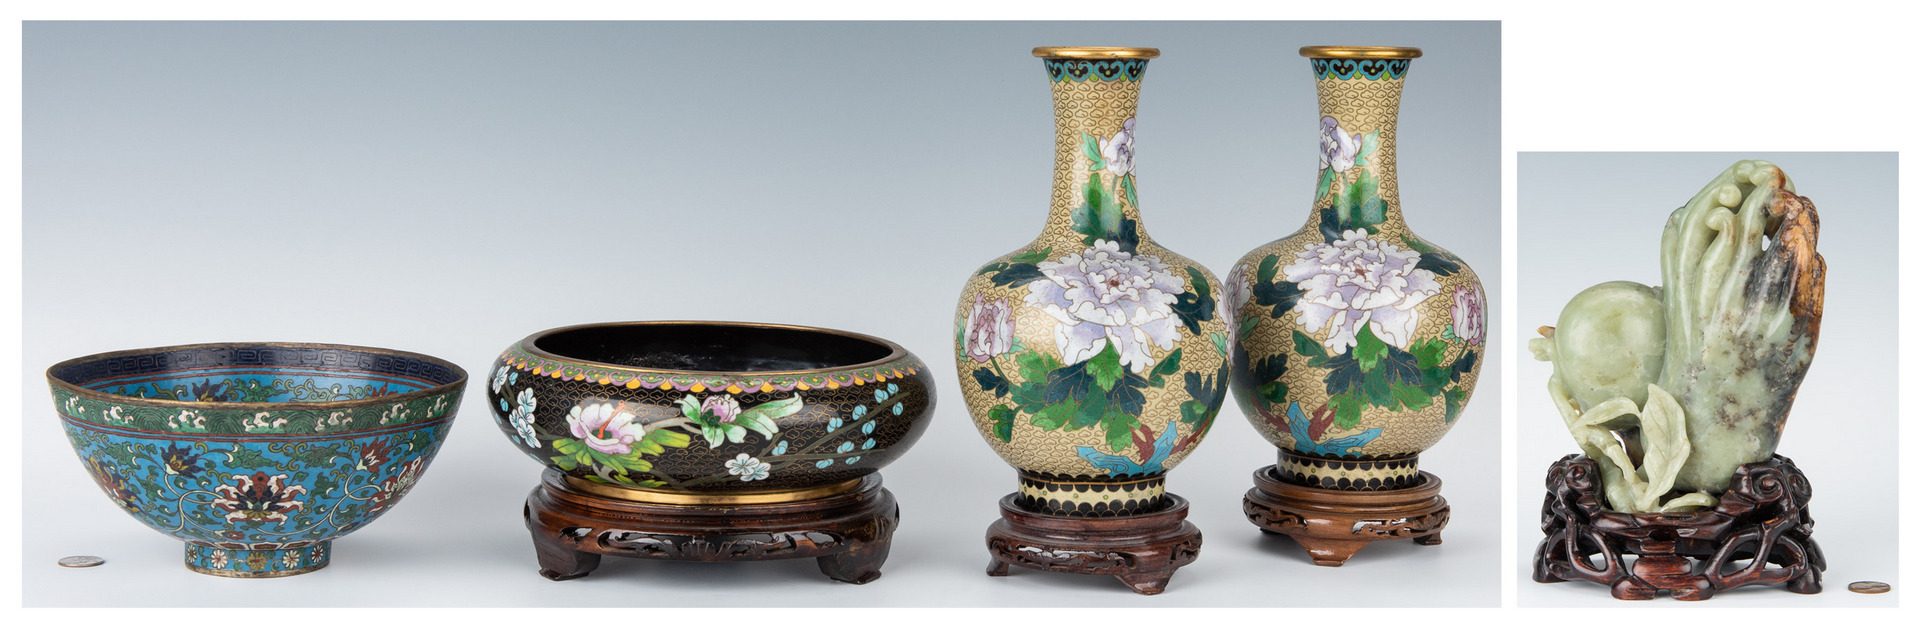 Lot 12: 5 Chinese Decorative Items